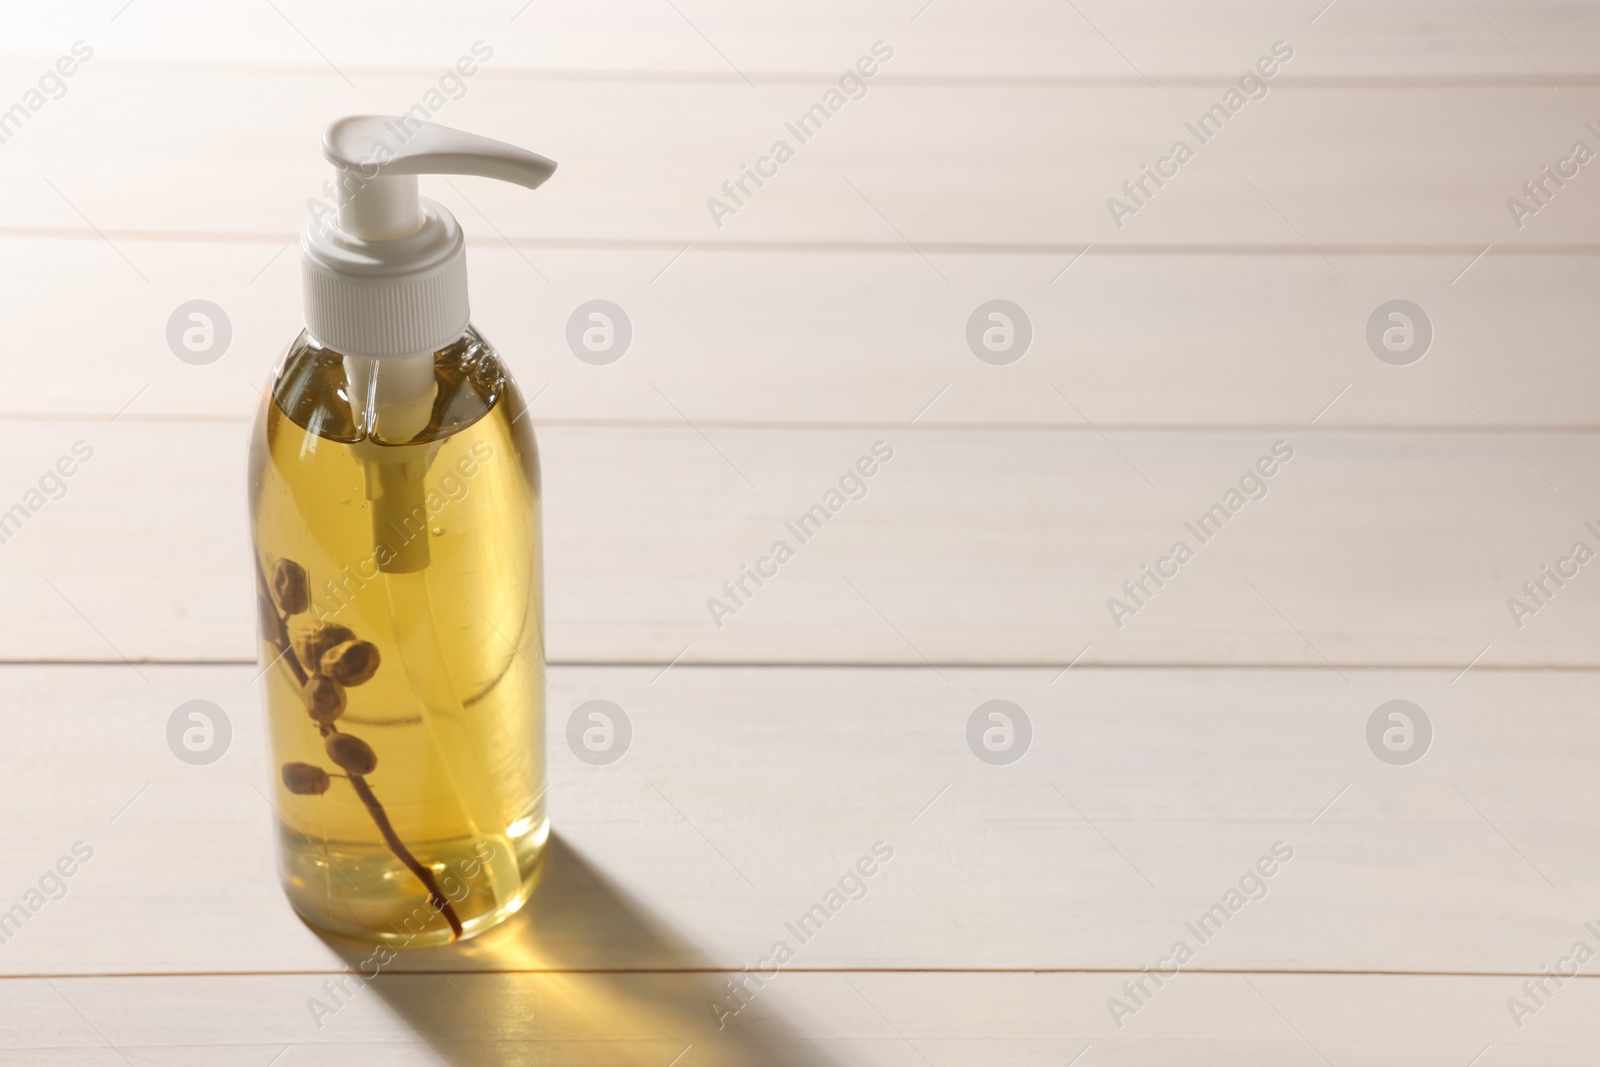 Photo of Dispenser of liquid soap on white wooden table, space for text